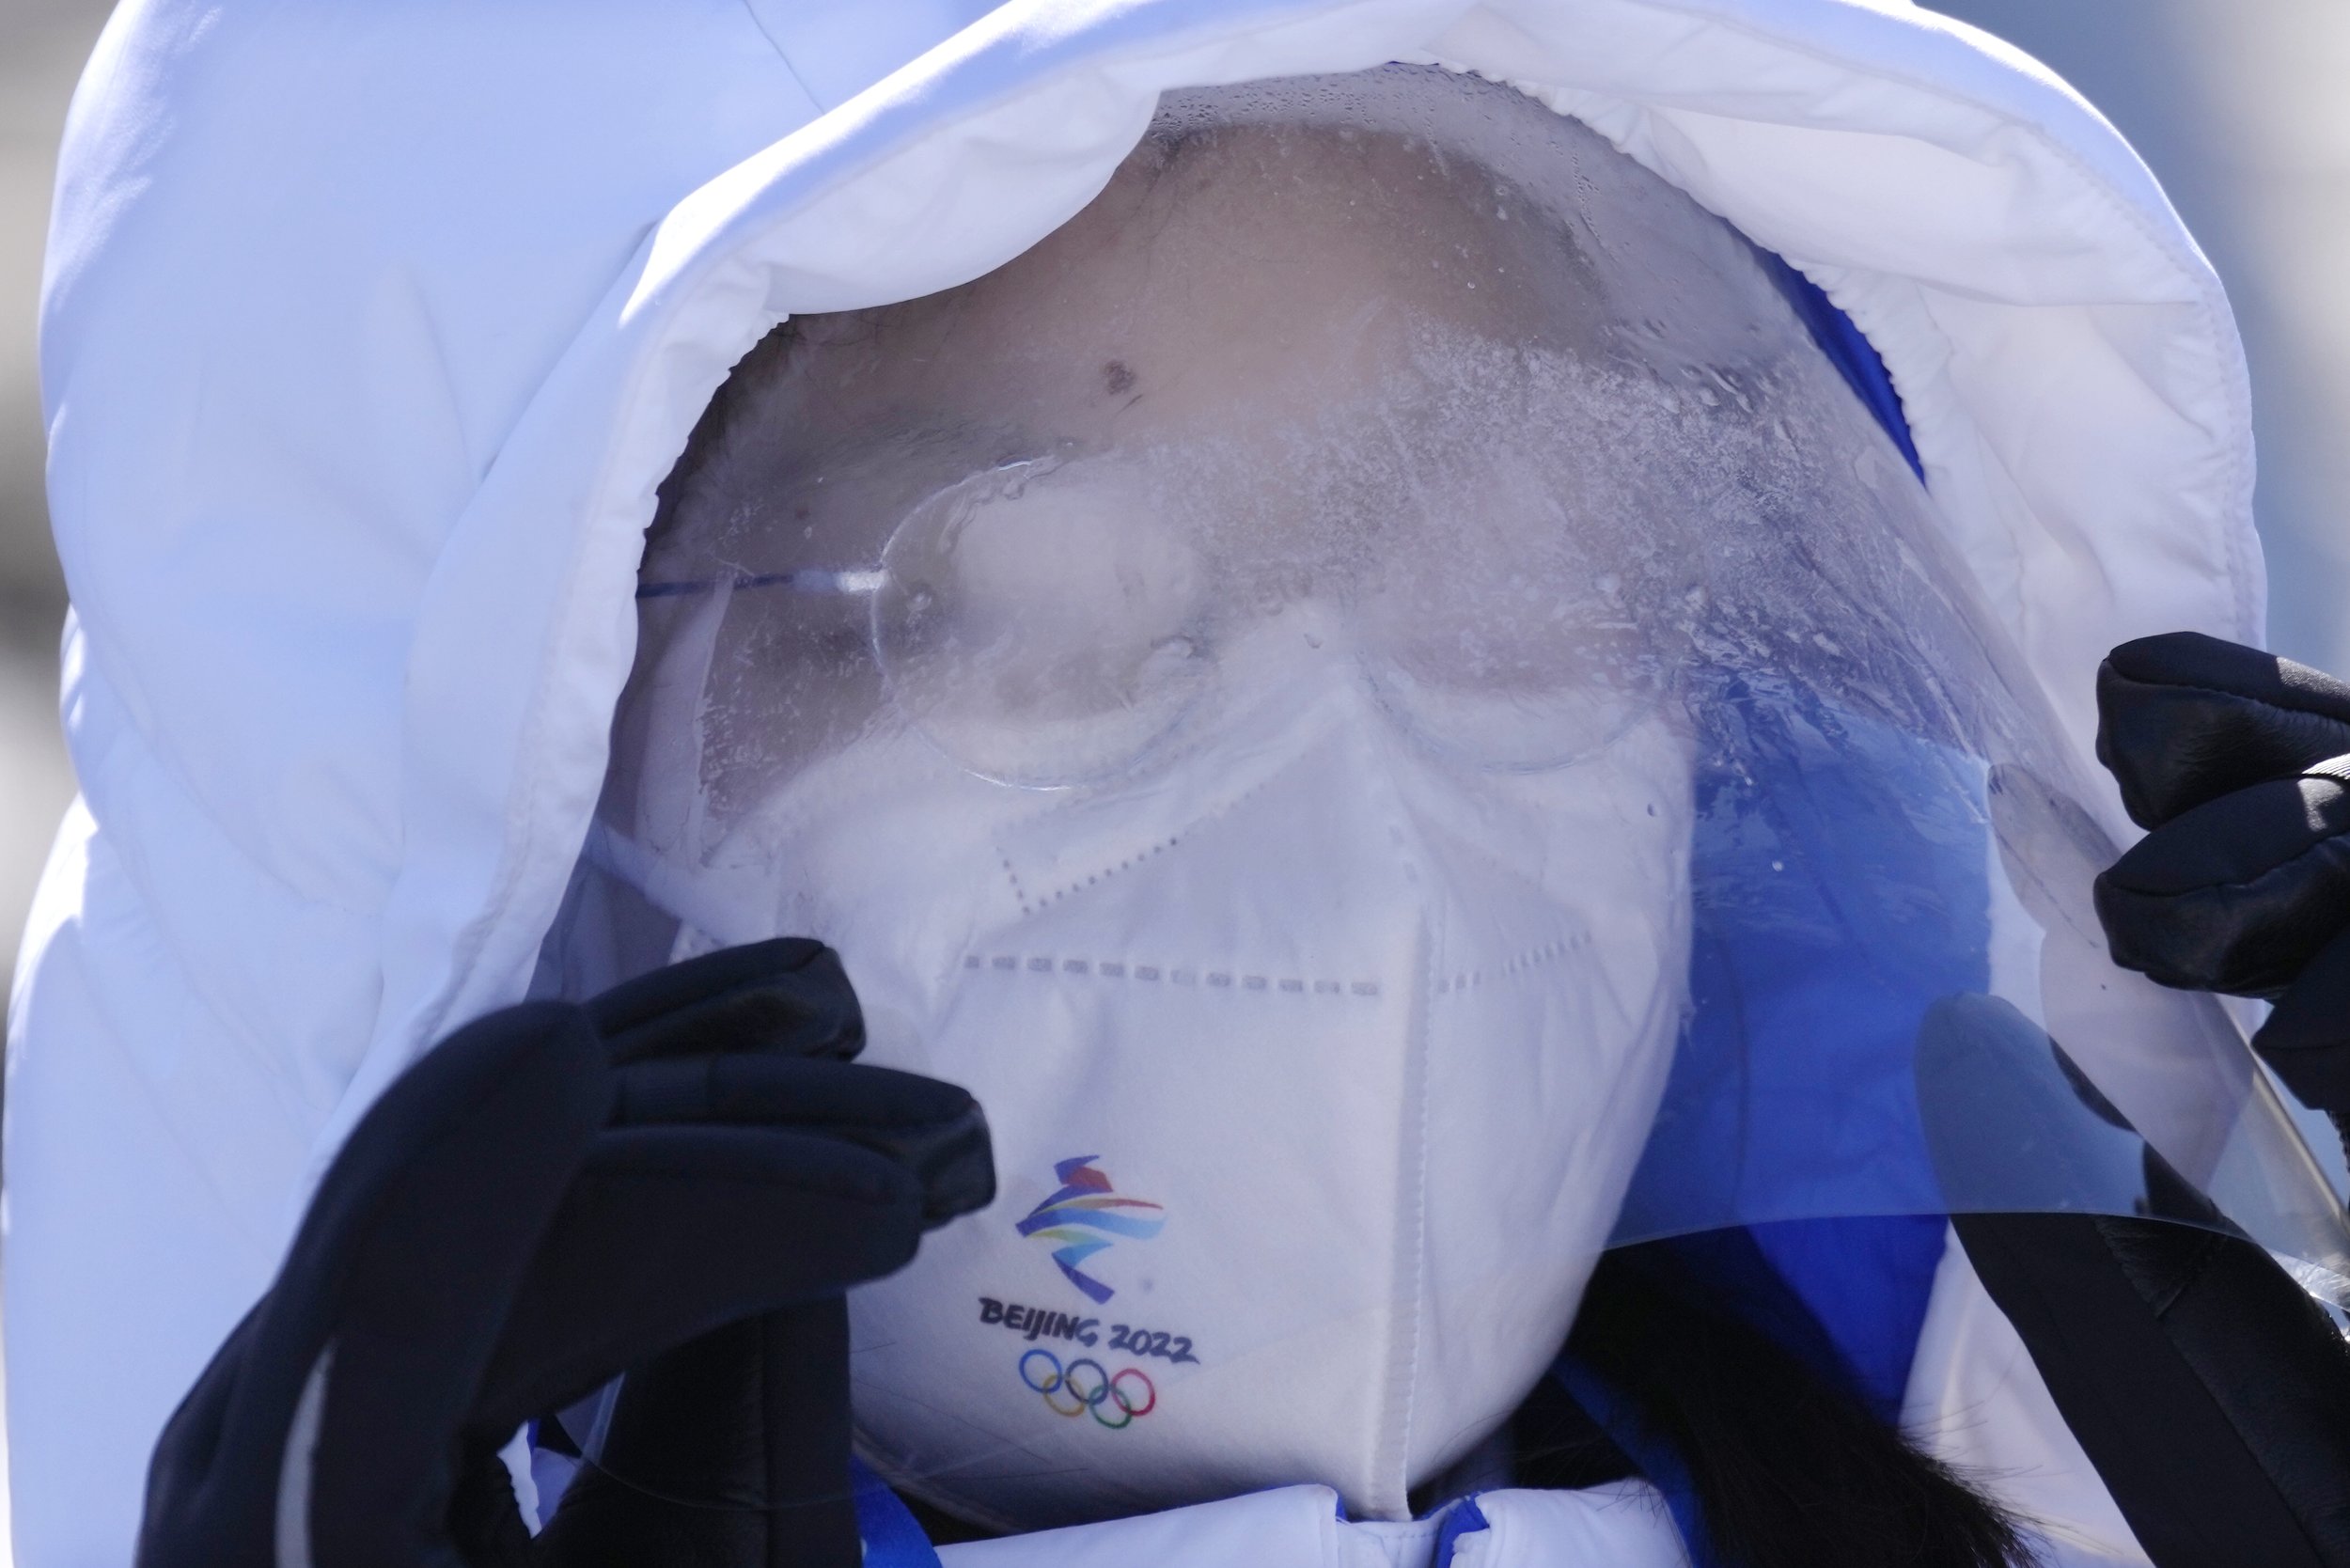  A volunteer lifts her frost covered mask at the National Biathlon Center during a practice session for the 2022 Winter Olympics, Thursday, Feb. 3, 2022, in Zhangjiakou, China. (AP Photo/Kirsty Wigglesworth) 